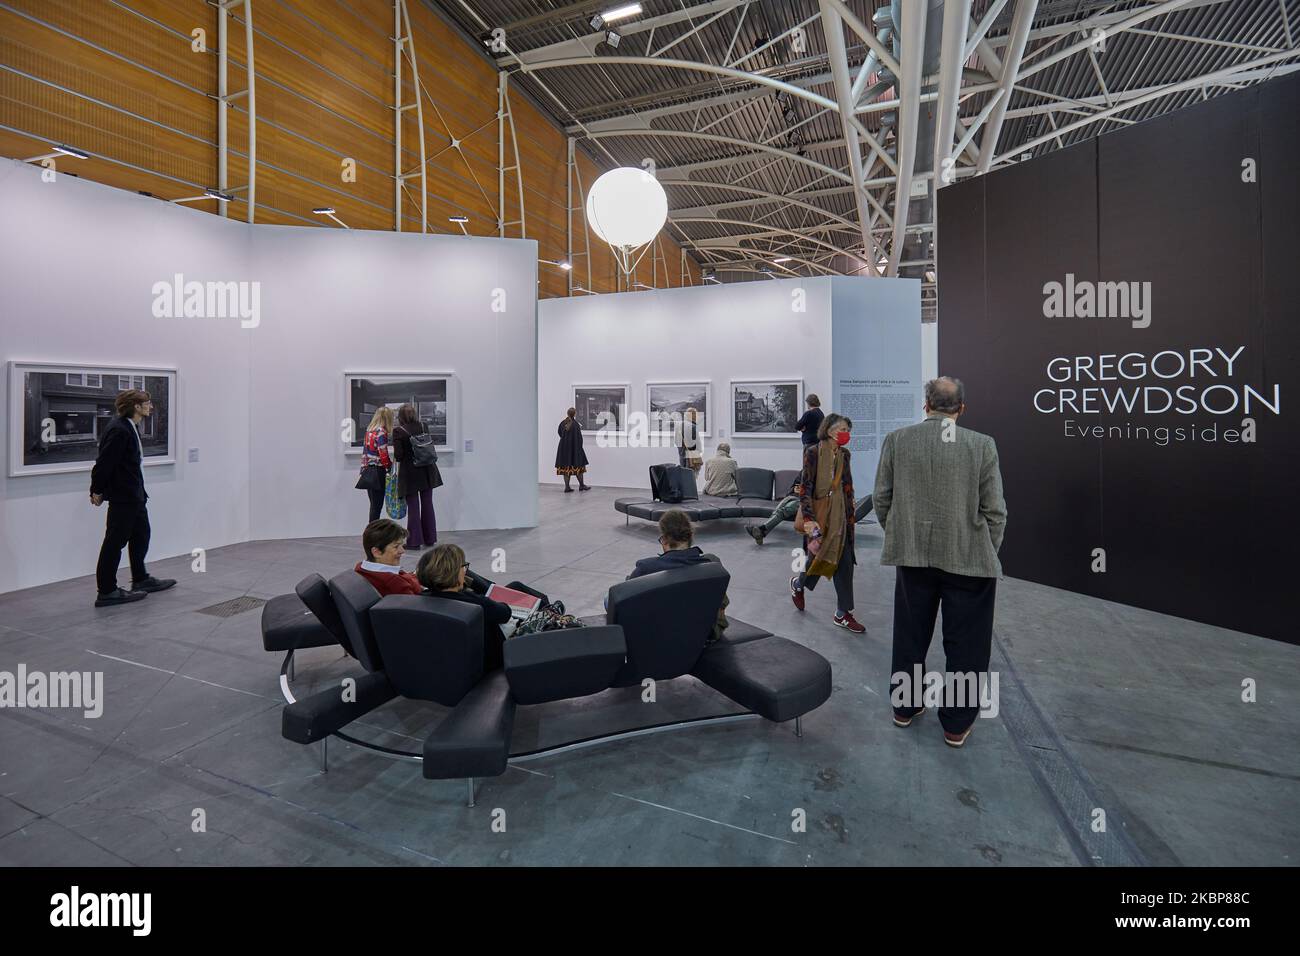 TURIN, ITALY - NOVEMBER 03, 2022: Artissima 2022, Gregory Crewdson exhibition with people and art collectors at contemporary art fair vernissage Stock Photo